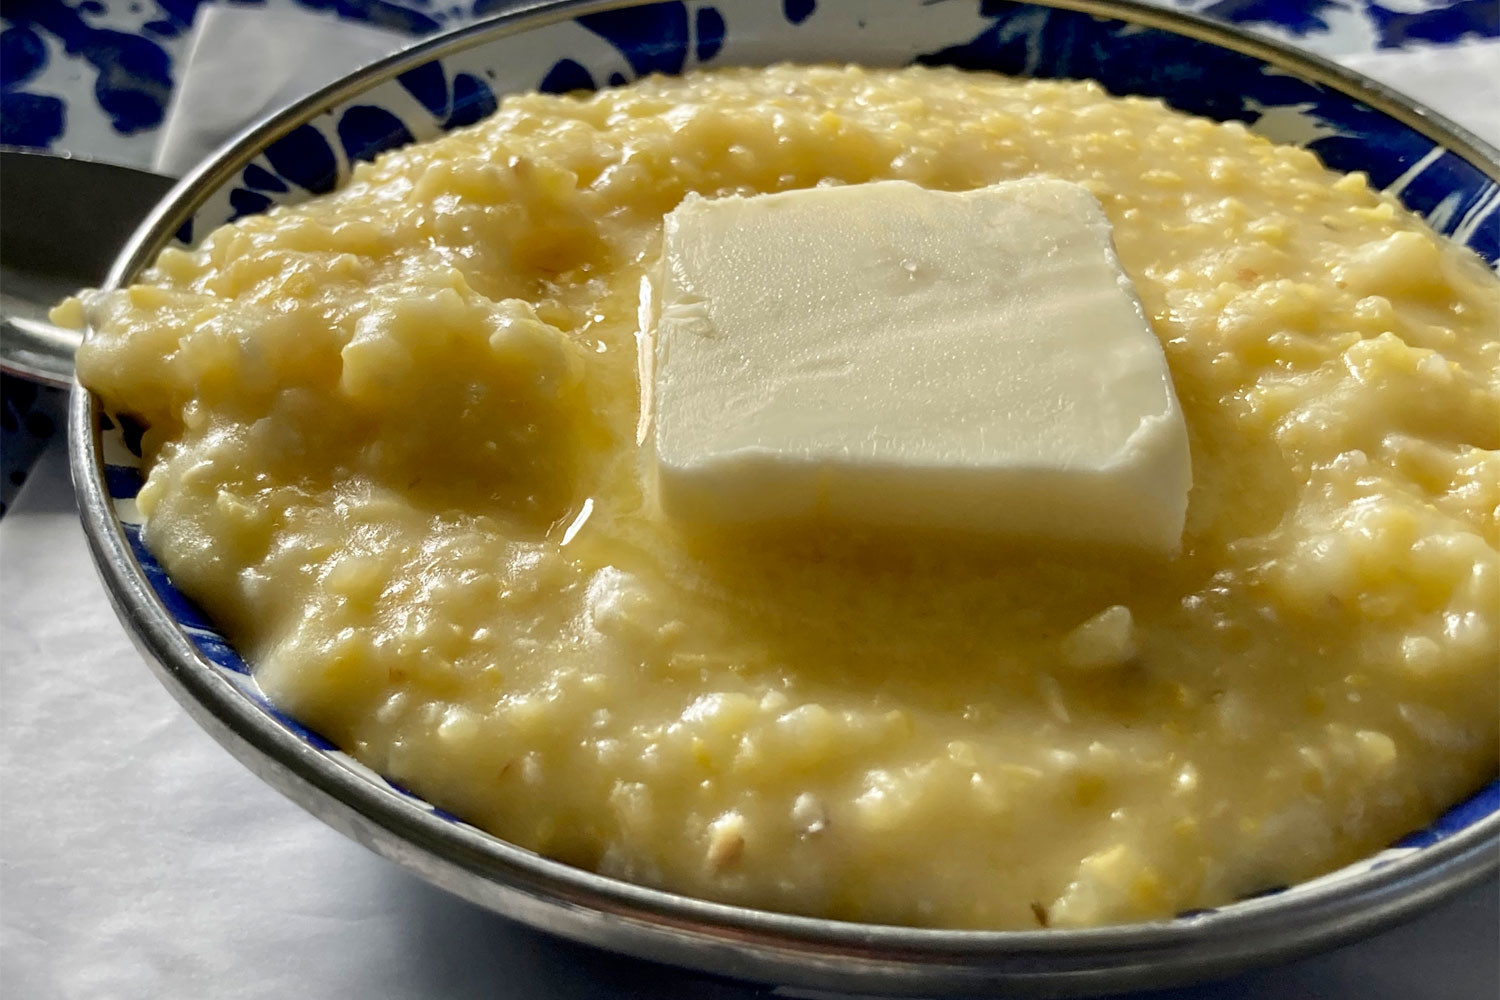 A bowl of grits with butter